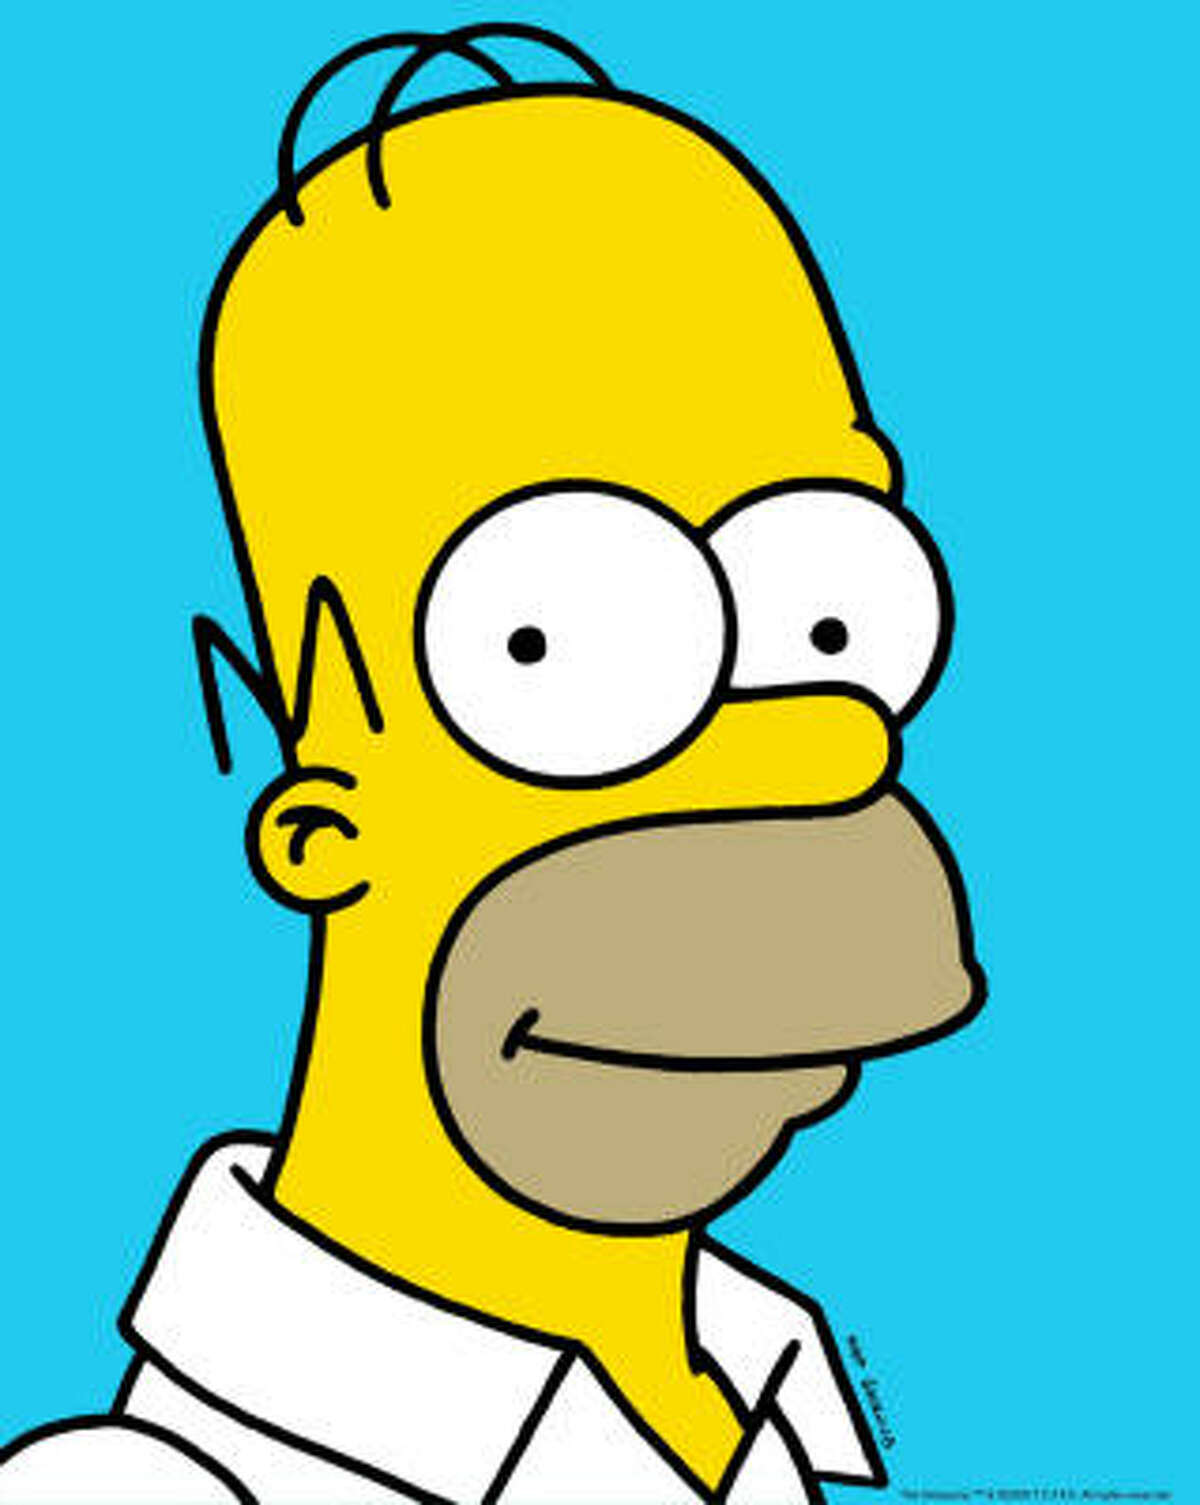 Homer Simpson | The Simpsons